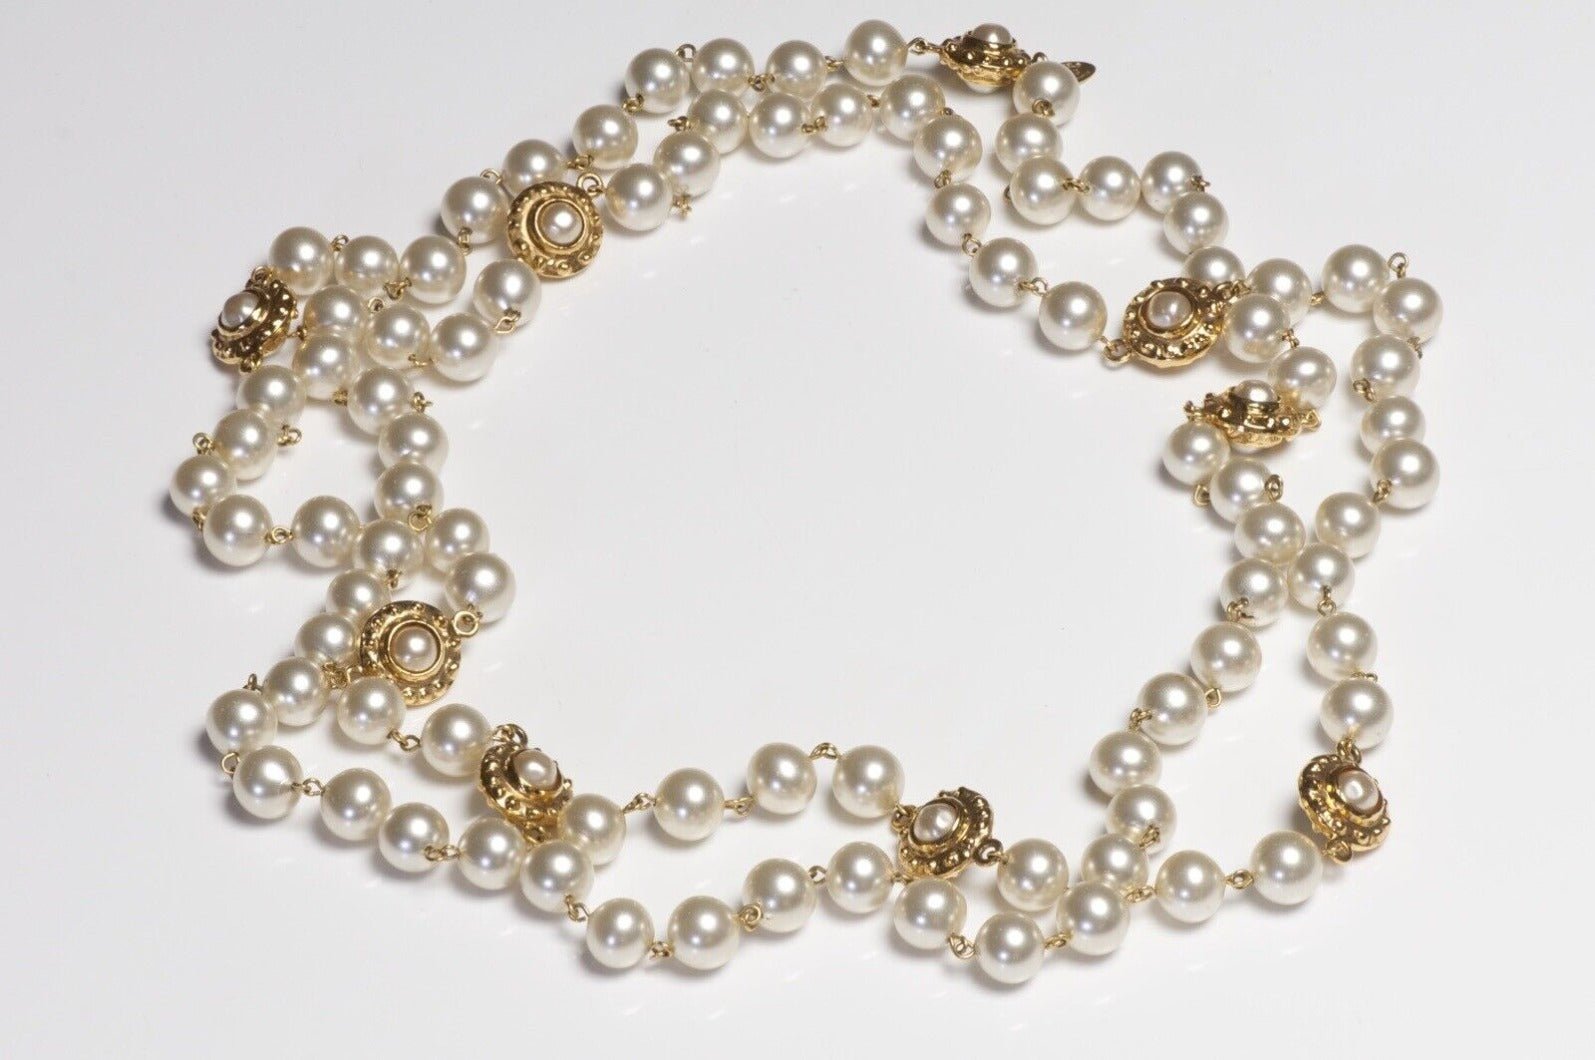 CHANEL Paris 1980’s Byzantine Style Extra Long Pearl Sautoir Necklace